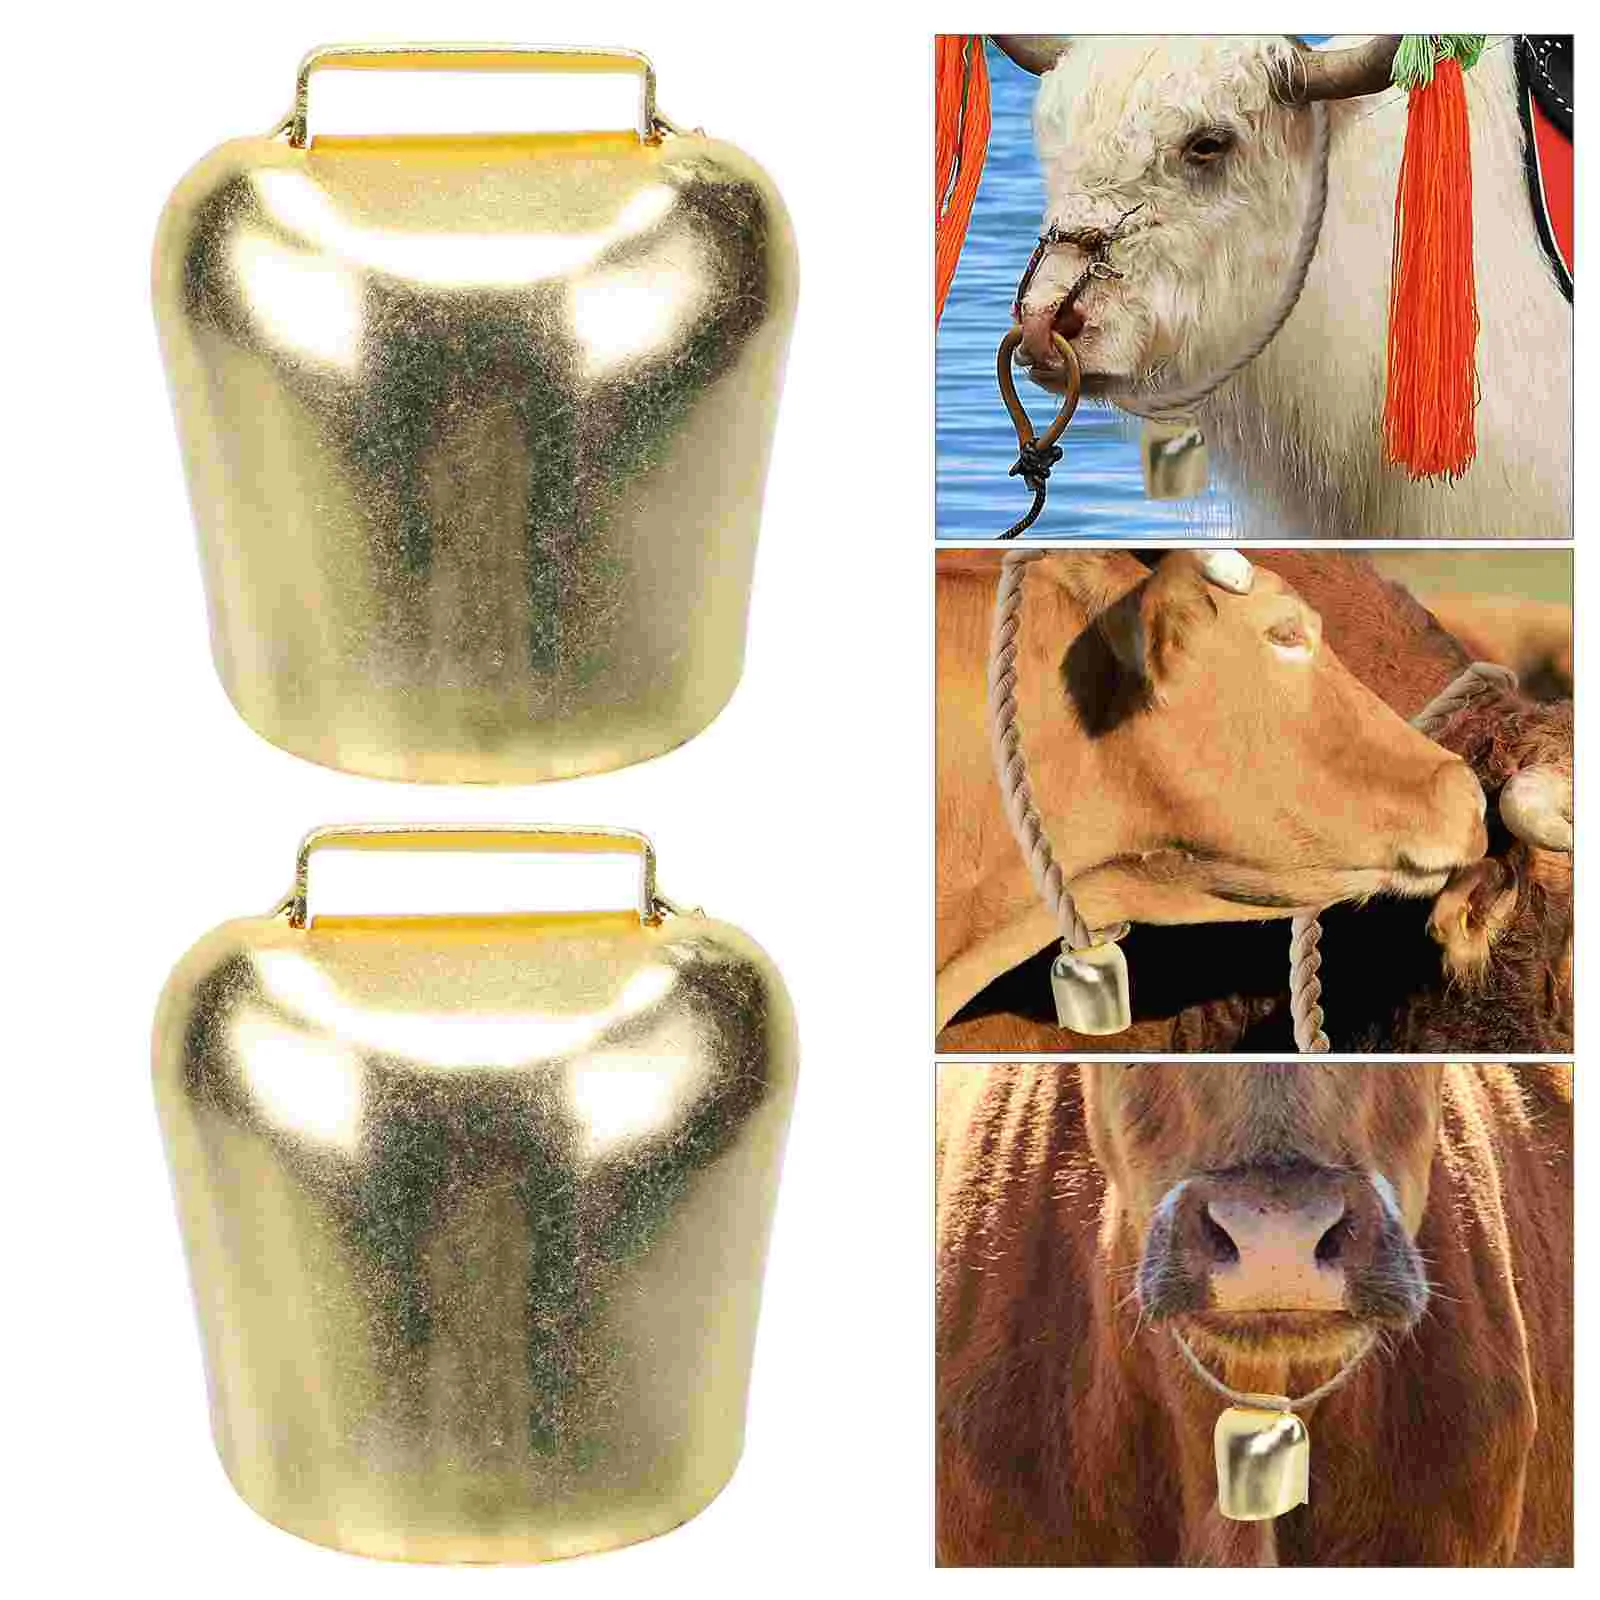 

Bells Bell Grazing Cow Pet Anti Metal Sheep Copper Lost Cattle Horse Animal Farm Retro Craft Red Cowbell Training Potty Dog